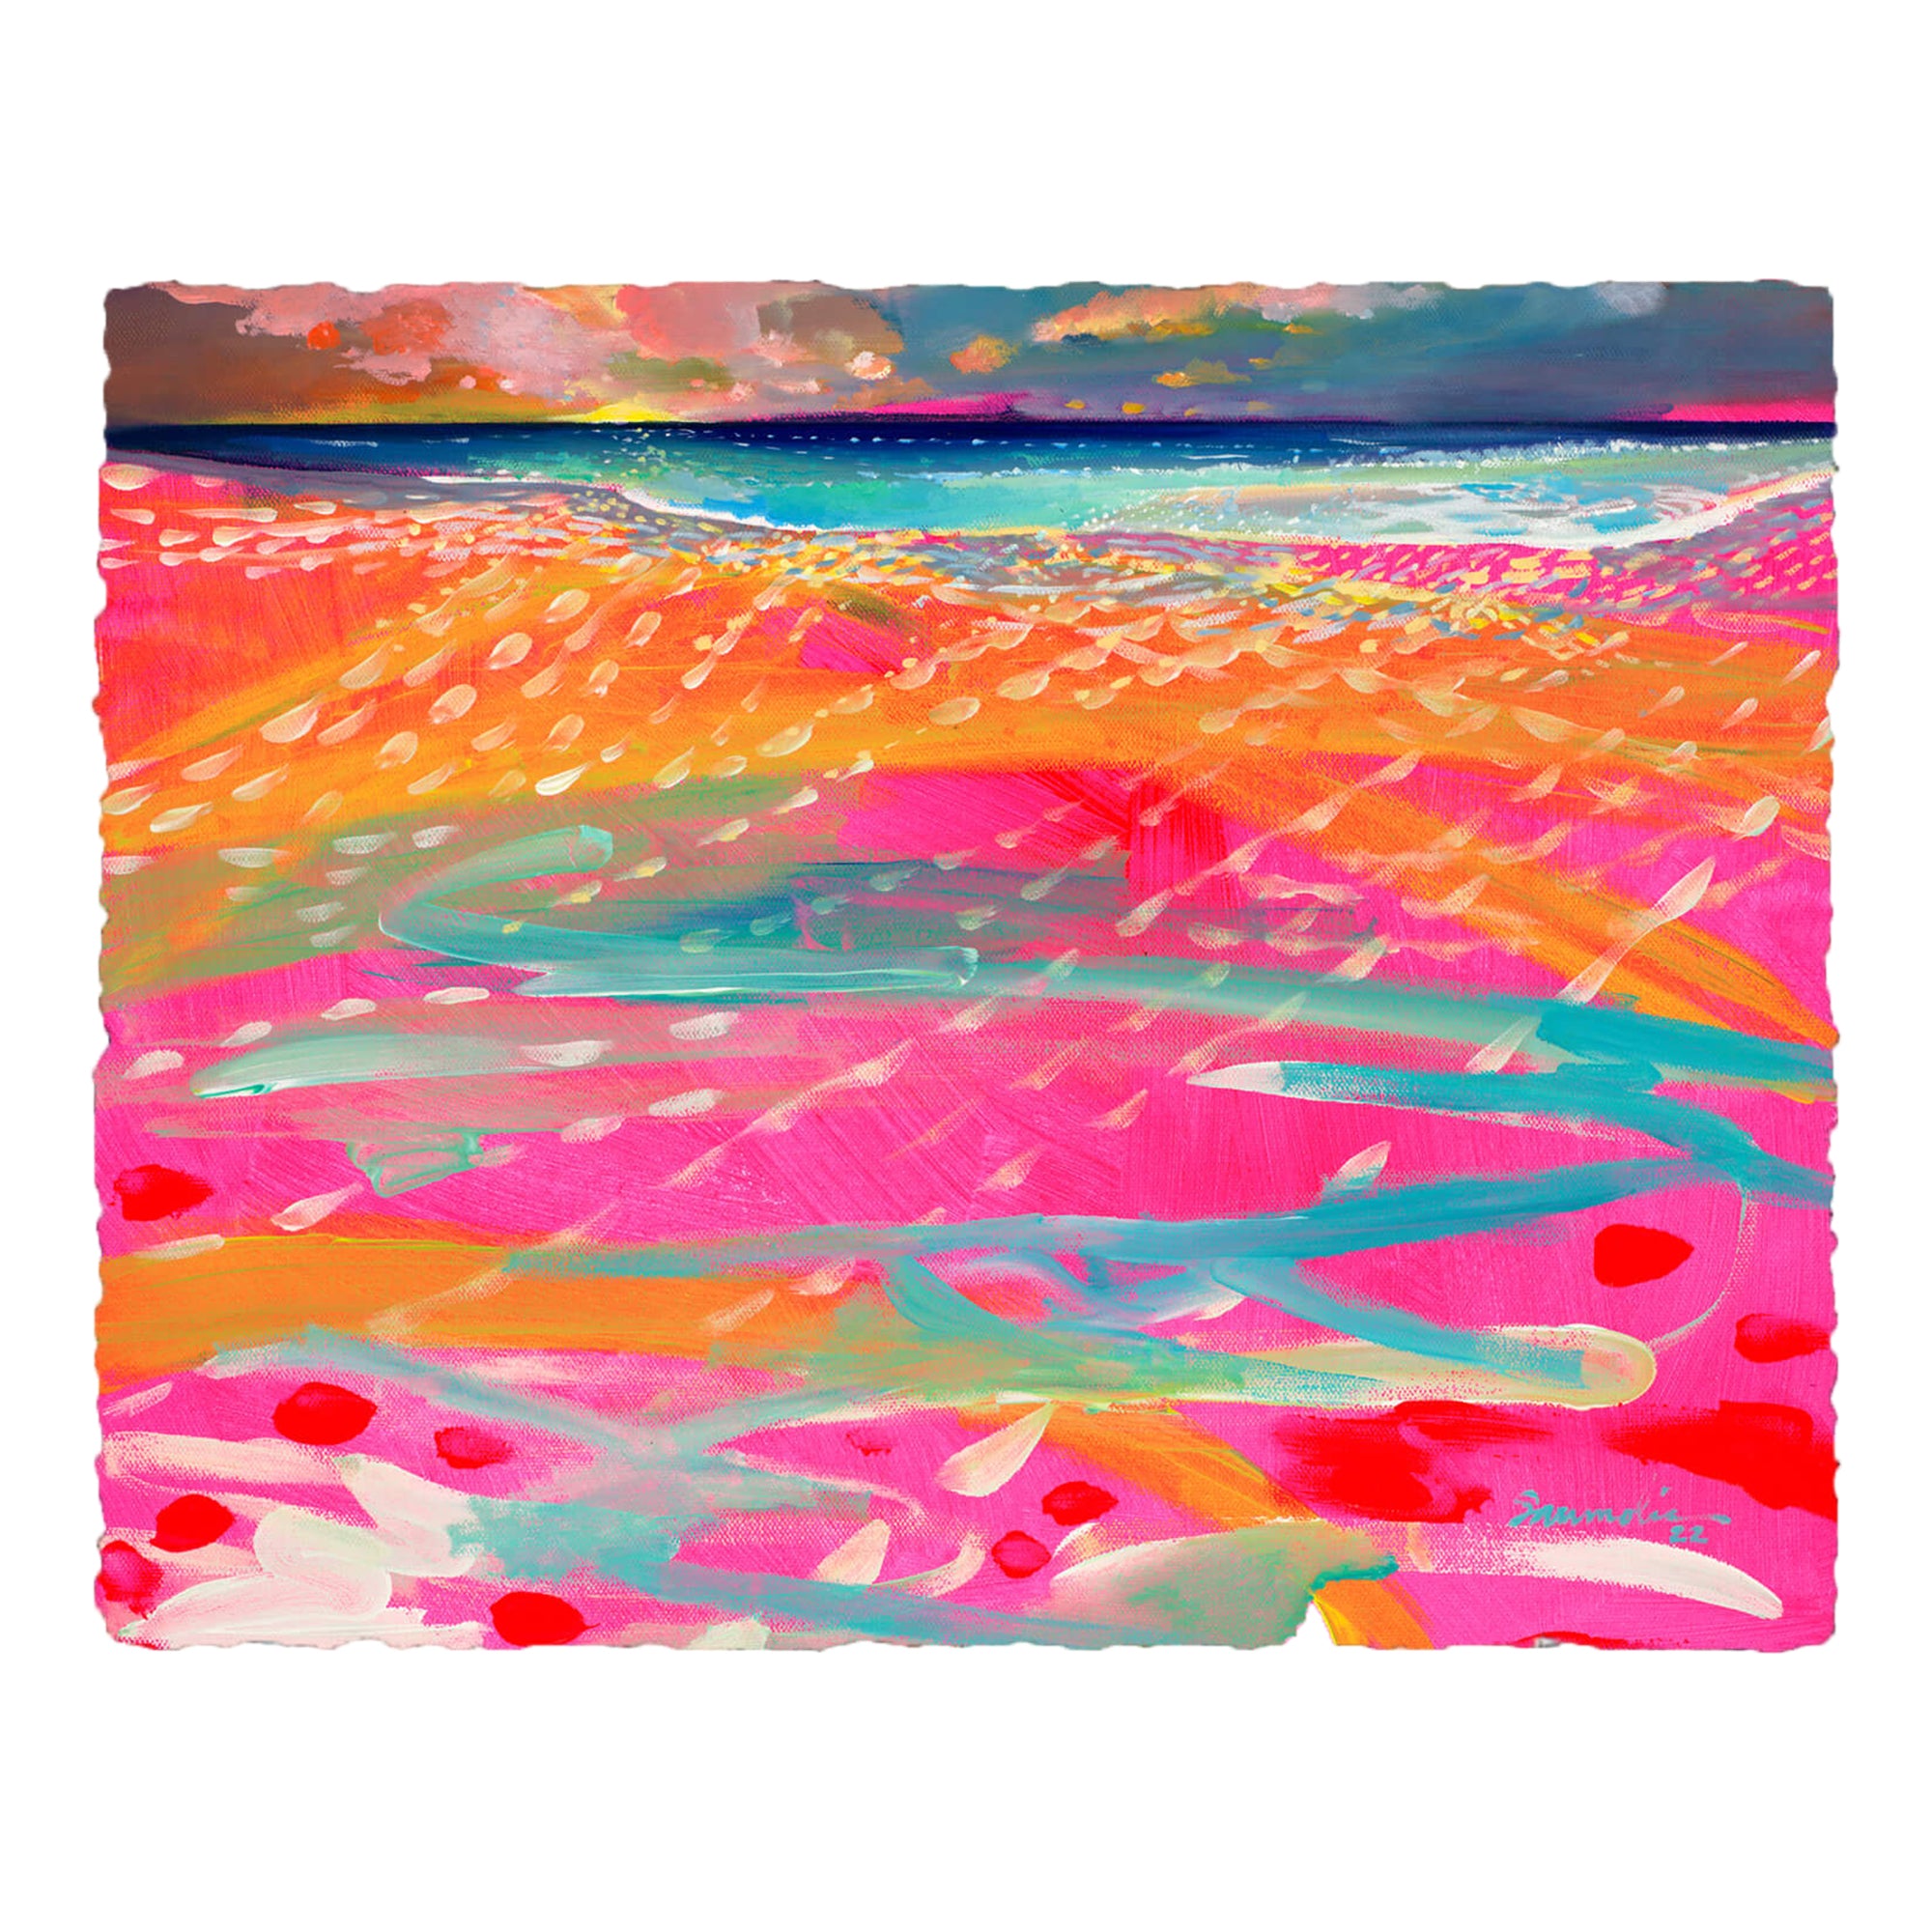 A watercolor paper giclée print featuring this beautiful vibrant neon-colored seascape by popular Hawaii artist Saumolia Puapuaga